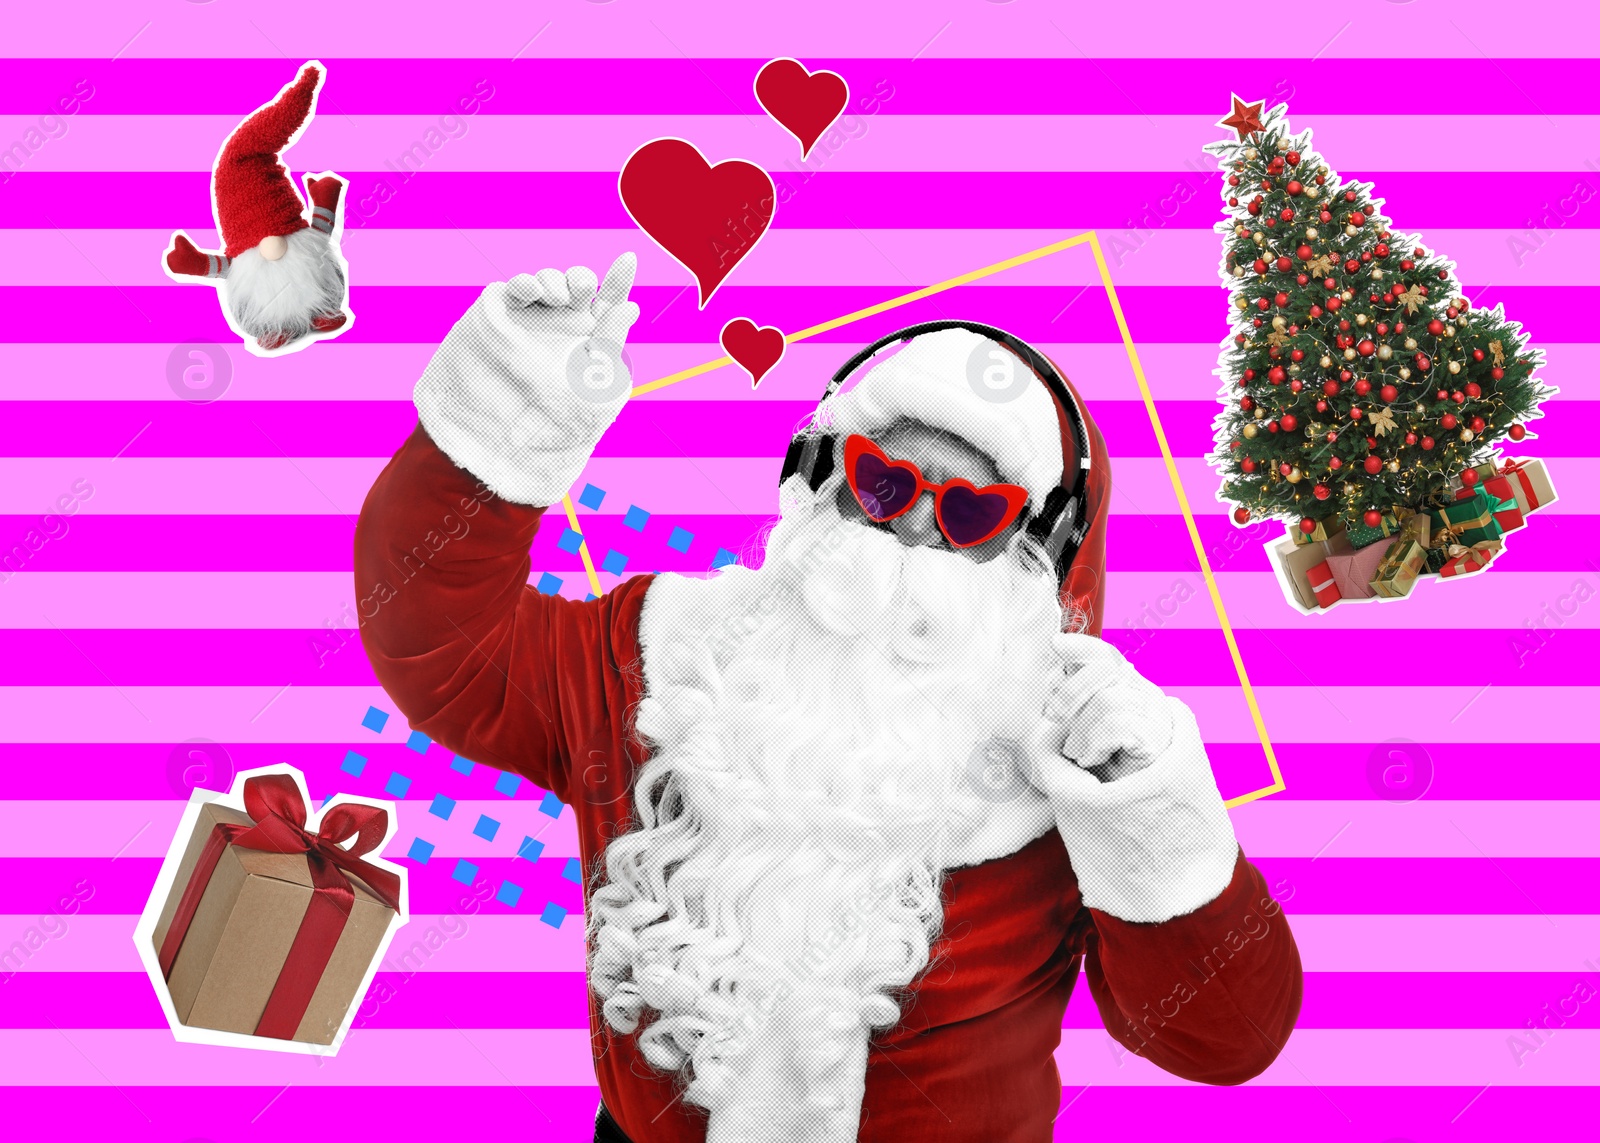 Image of Winter holidays bright artwork. Santa Claus listening to music via headphones, Christmas tree, gift boa and elf against color background, creative collage